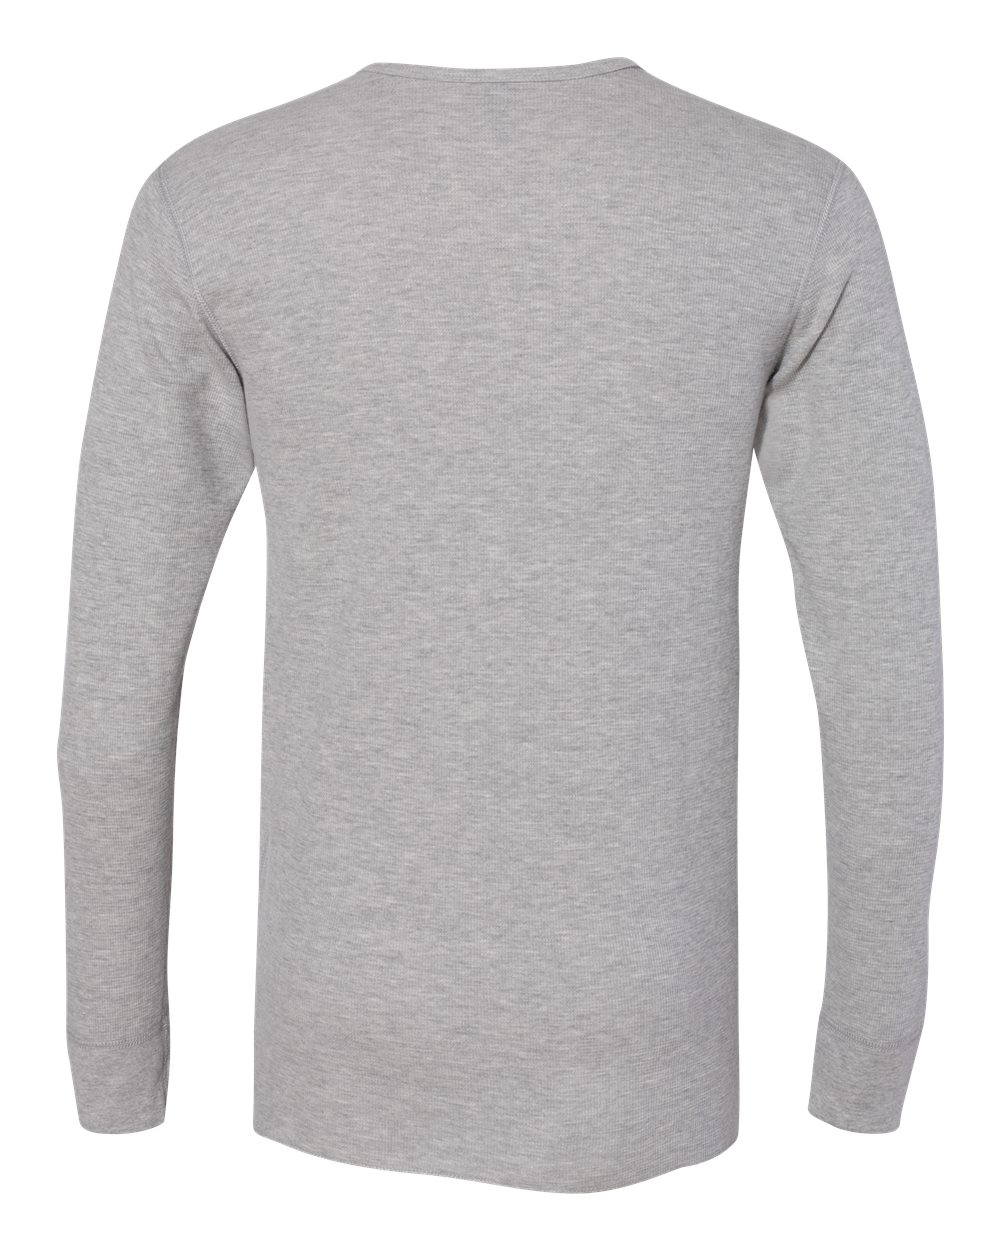 Next Level Unisex Long Sleeve Thermal T Shirt Top 8201 up to 2XL | eBay